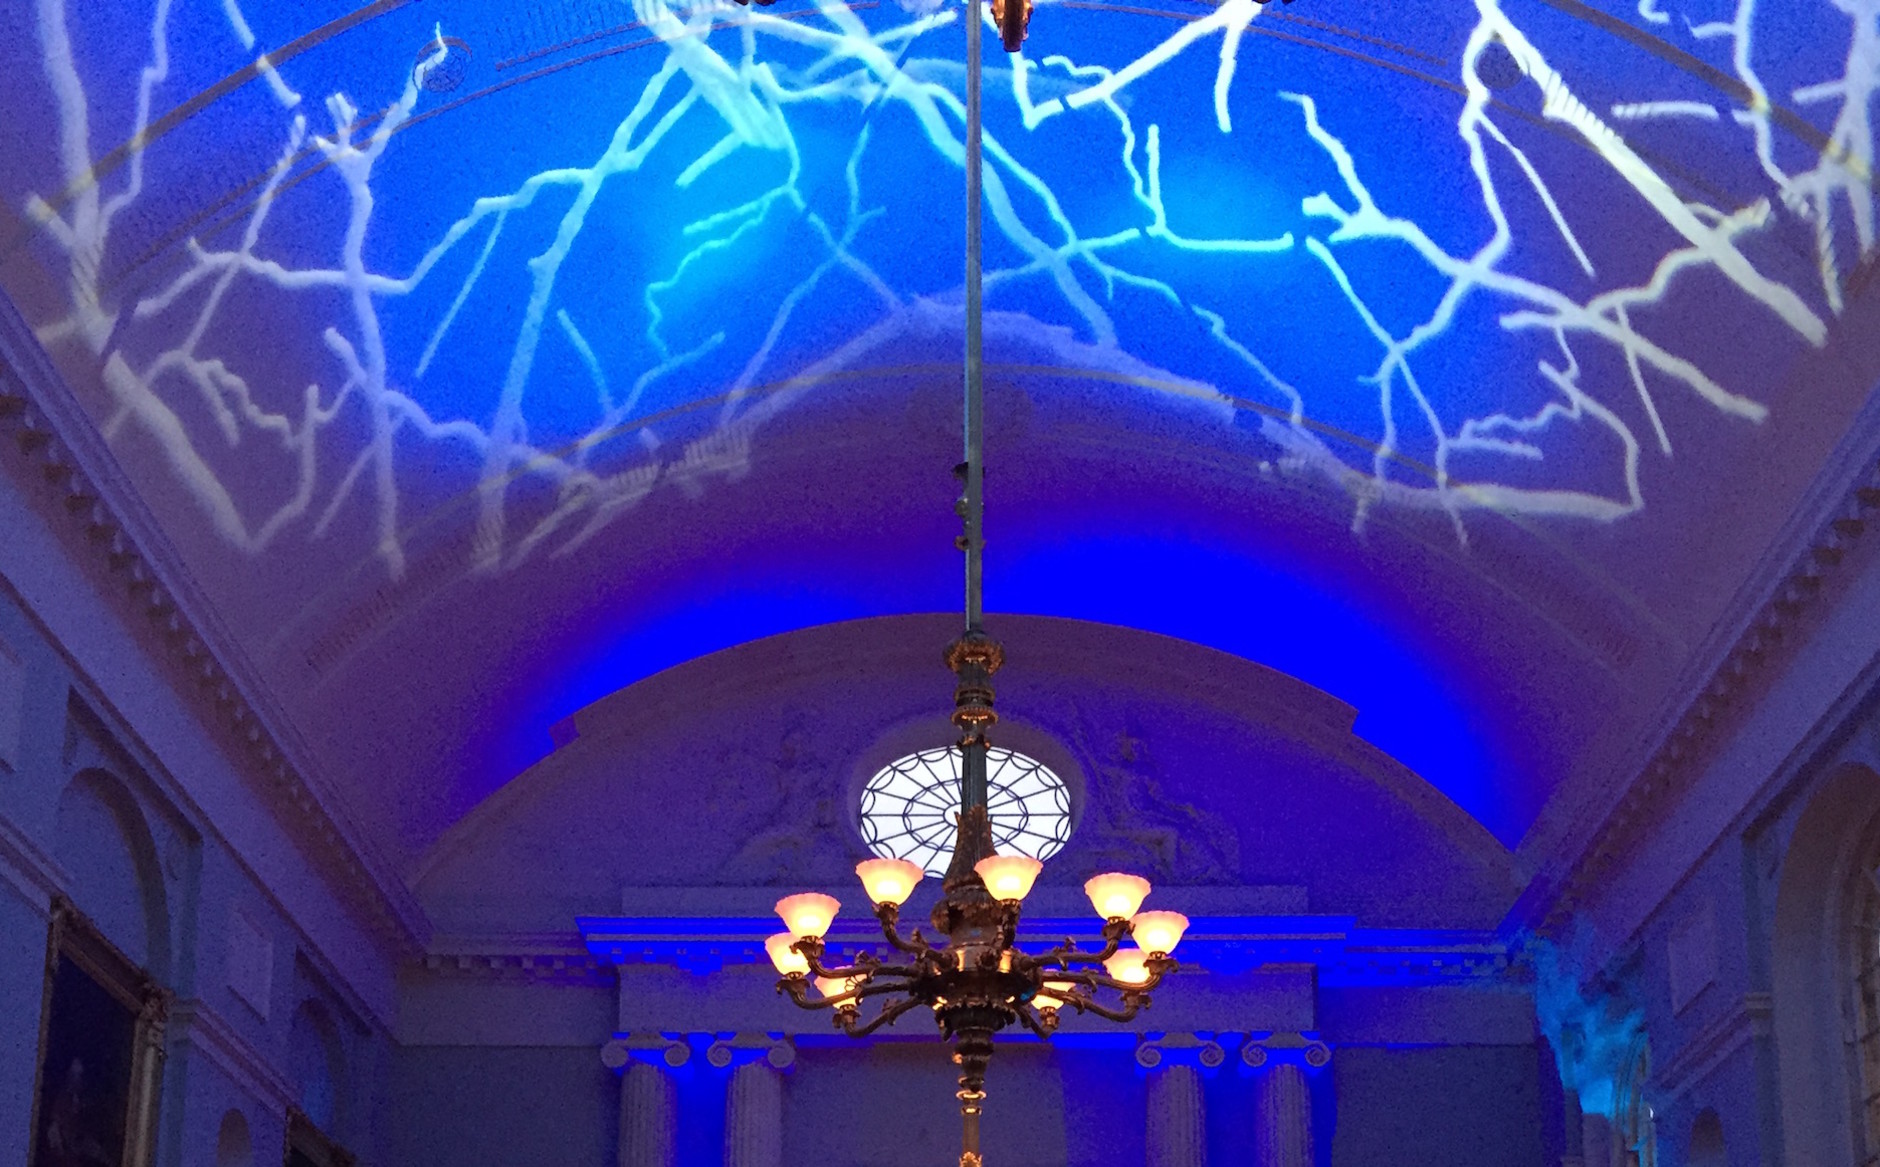 Lighting sets the theme of the event